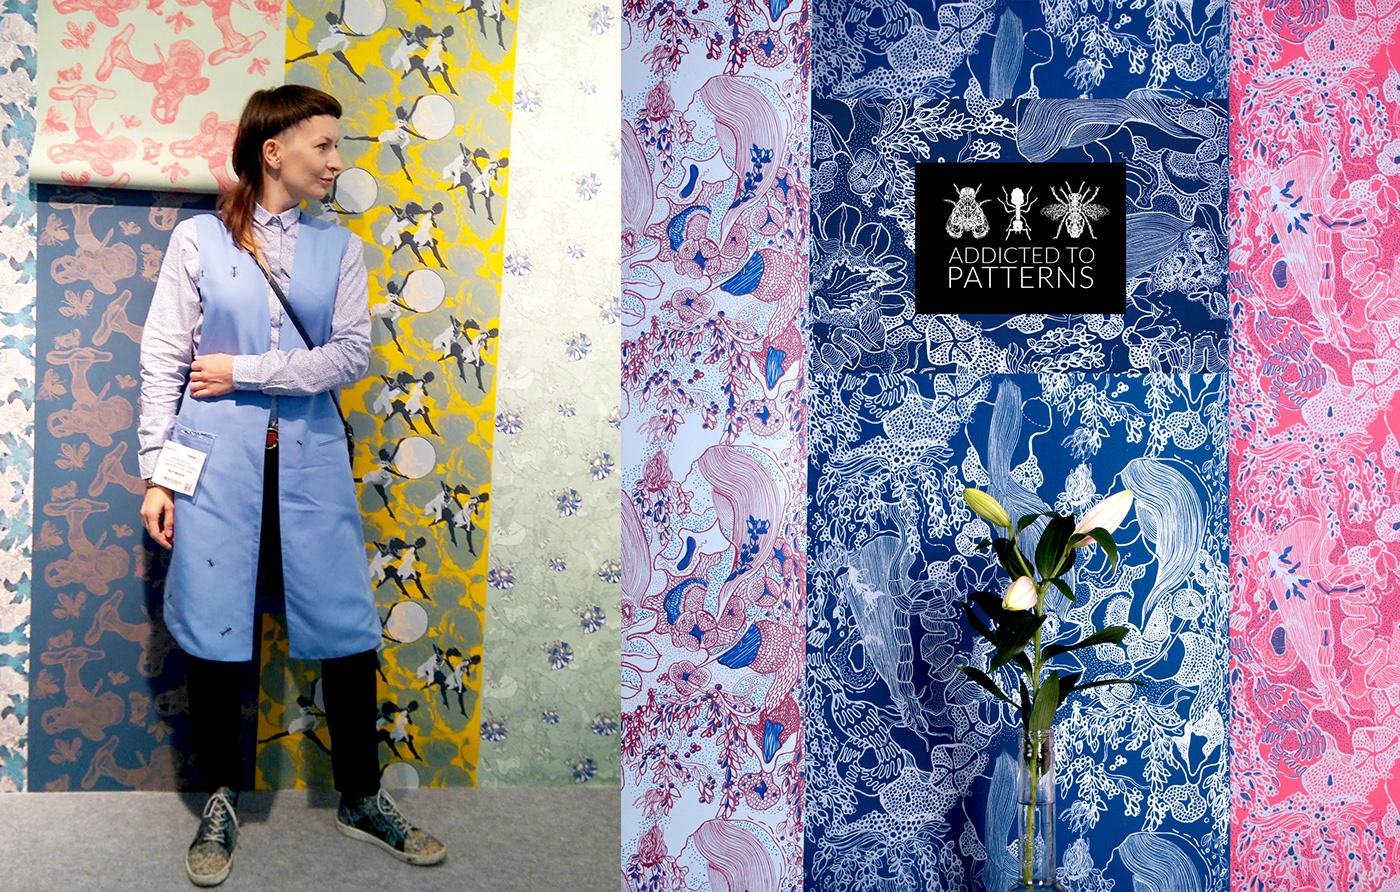 wallpapers surface design surface design printed with passion printmaking silkscreen wallcoverings customprinted